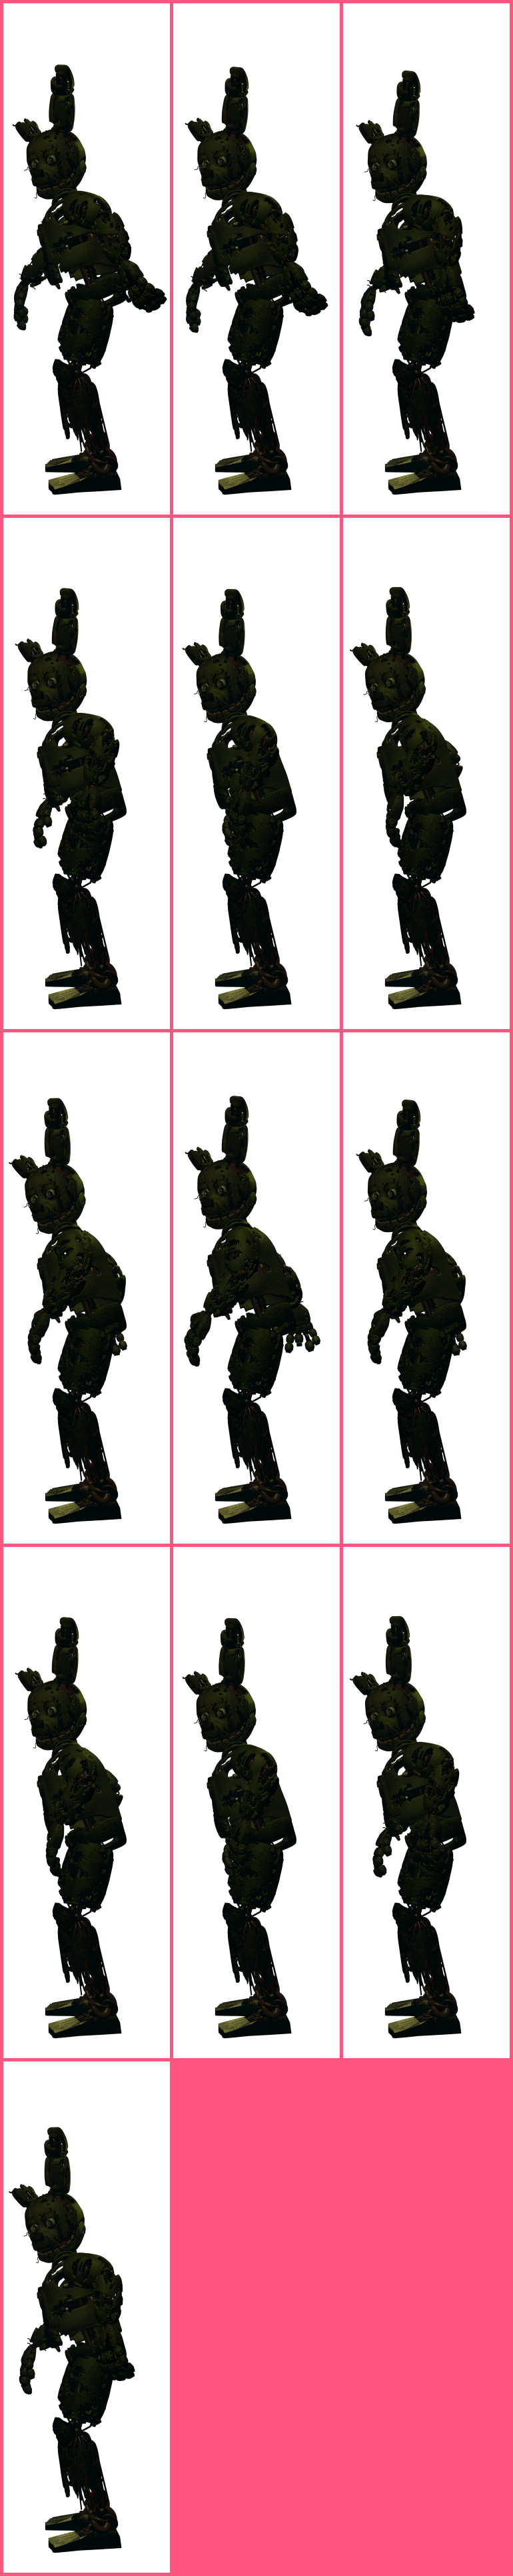 Five Nights at Freddy's 3 - Springtrap Running